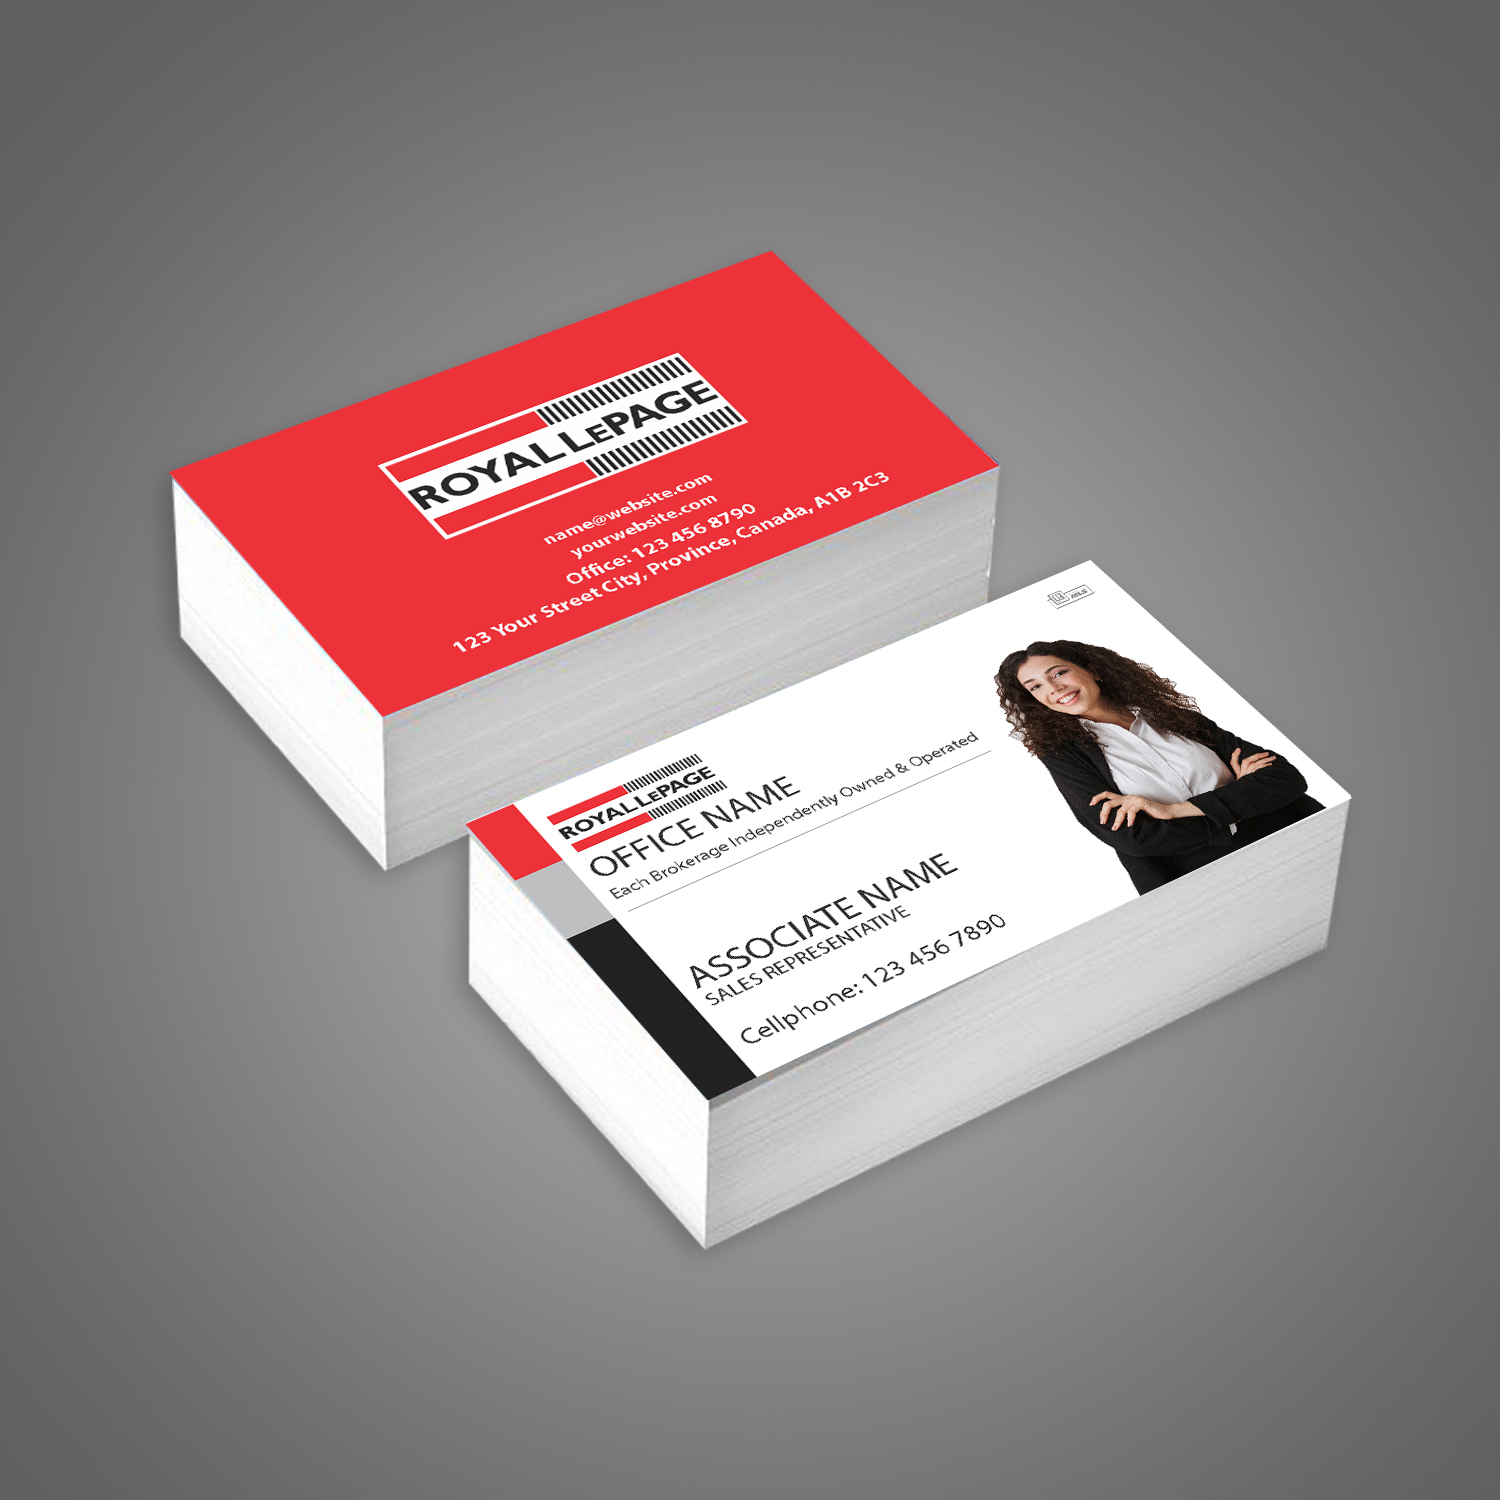 royal lepage business cards 2